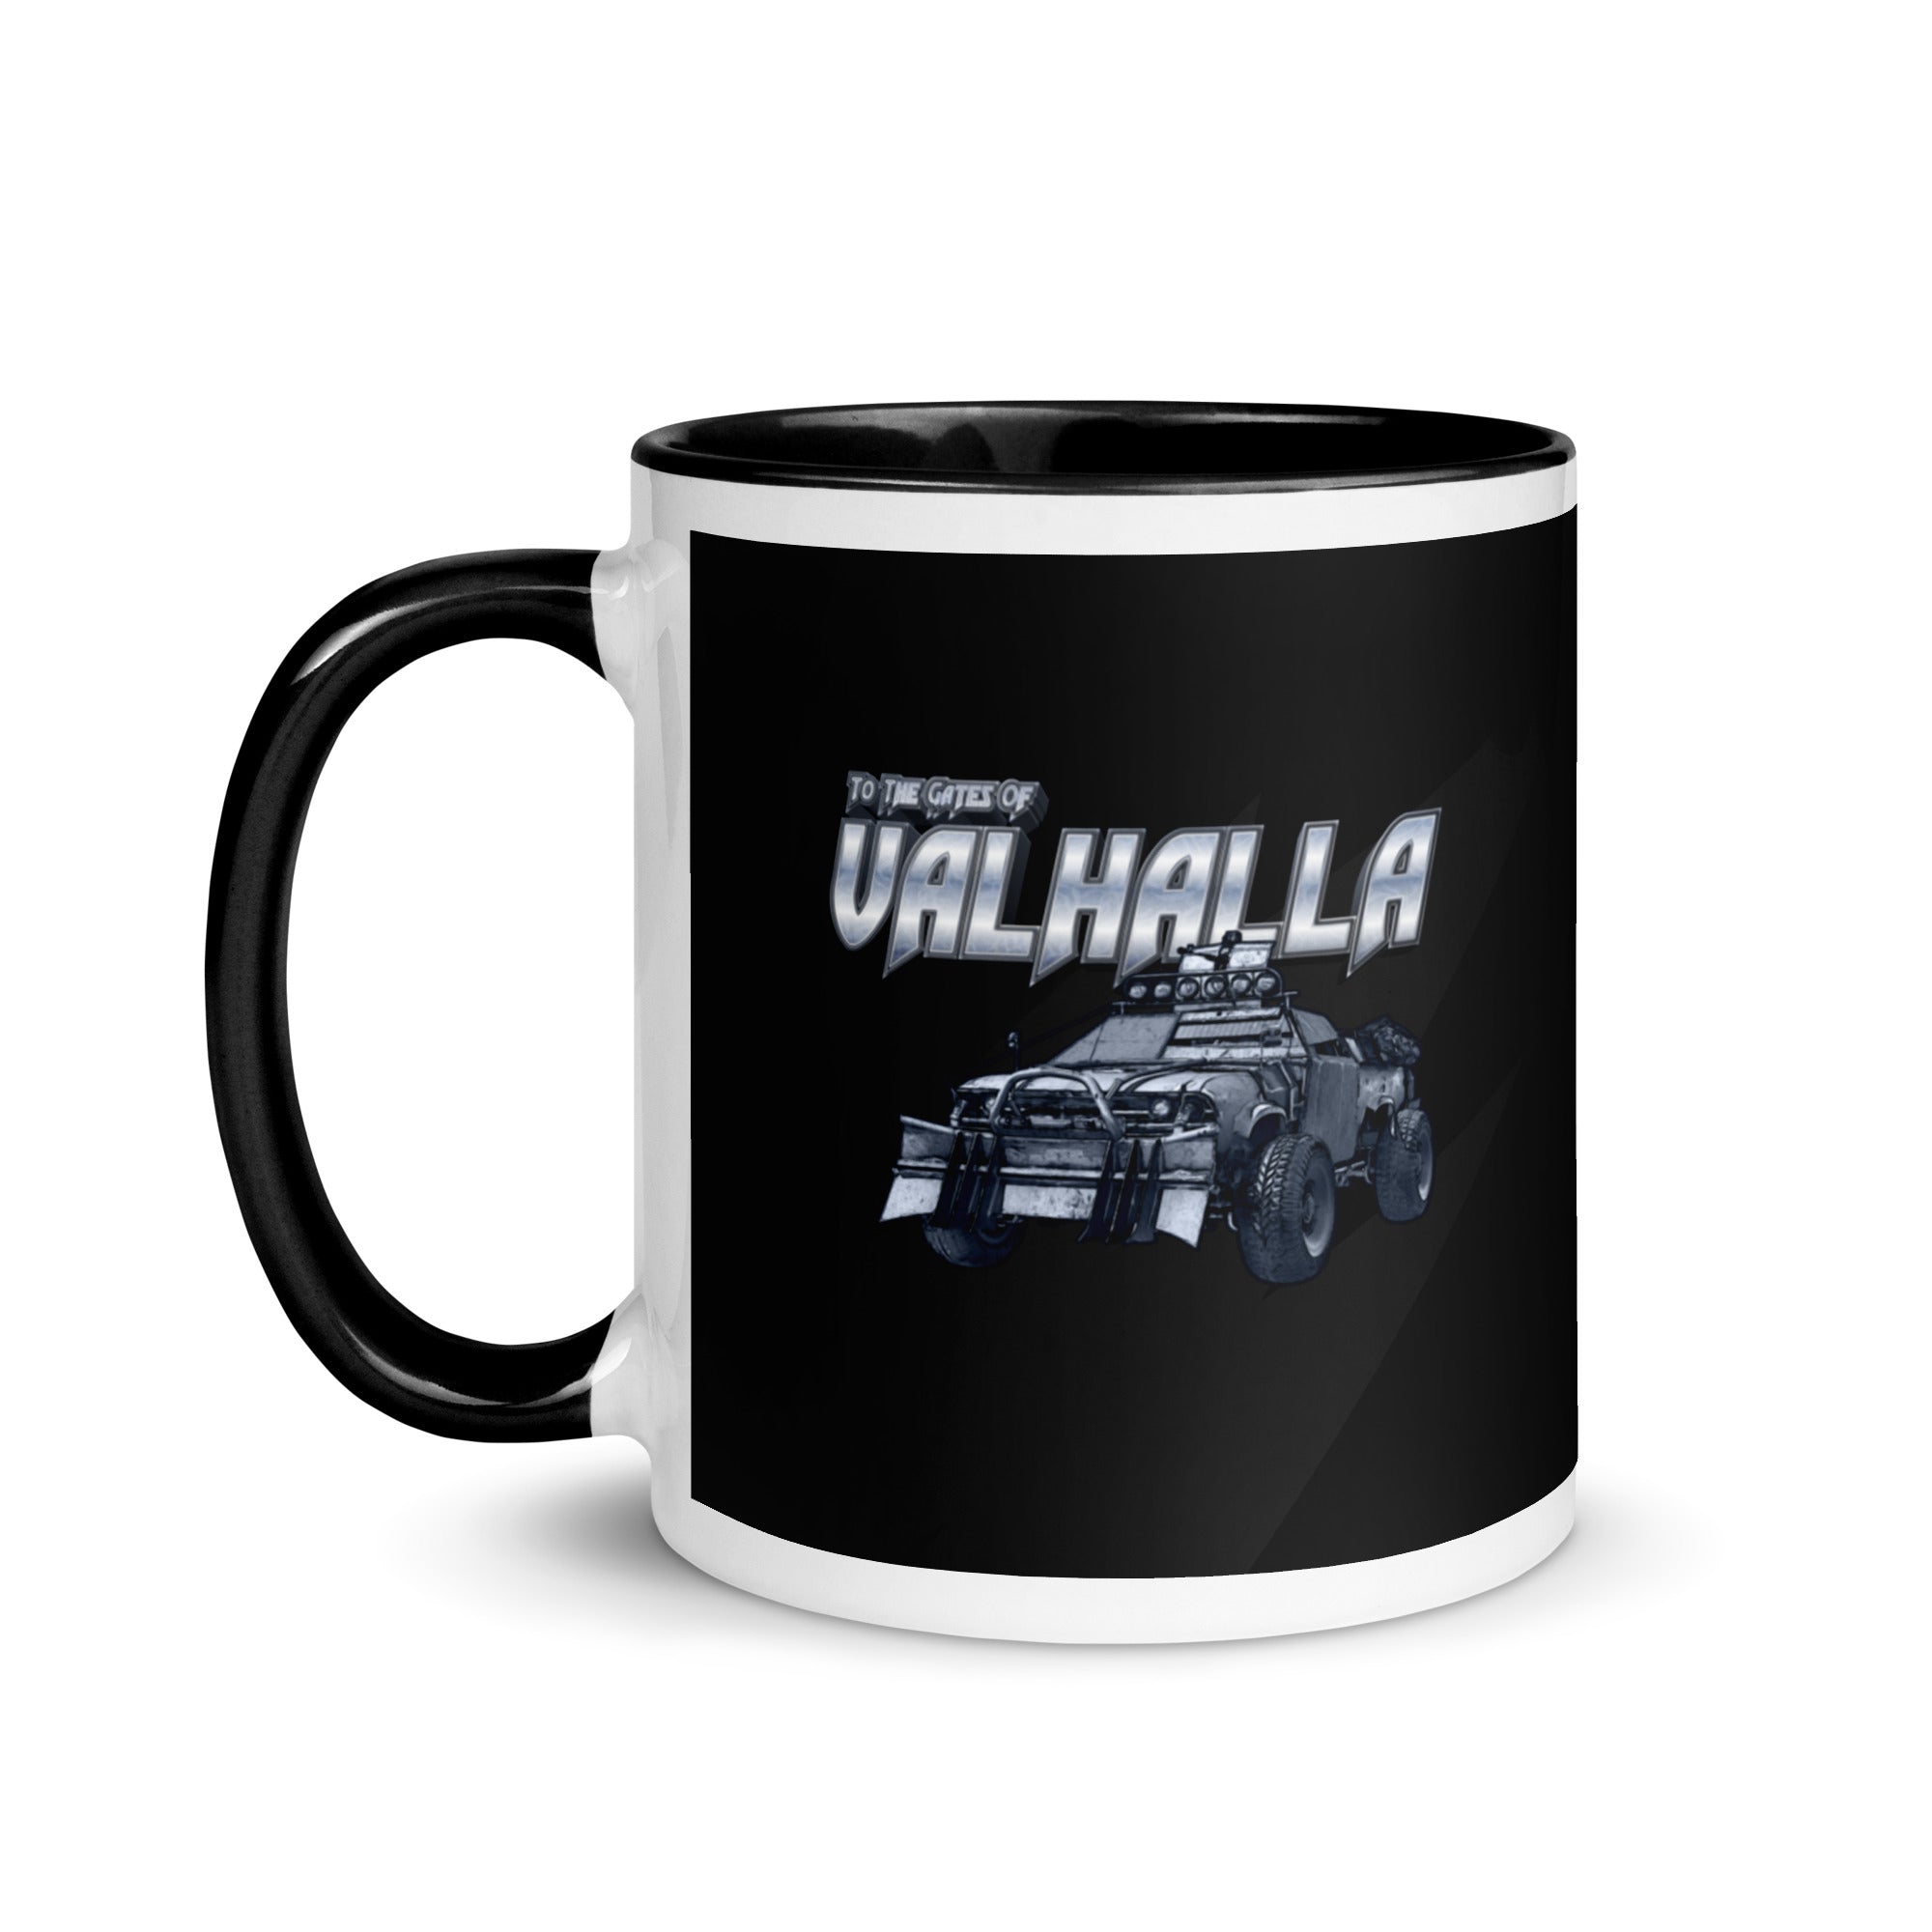 To The Gates of Valhalla Mug with Color Inside